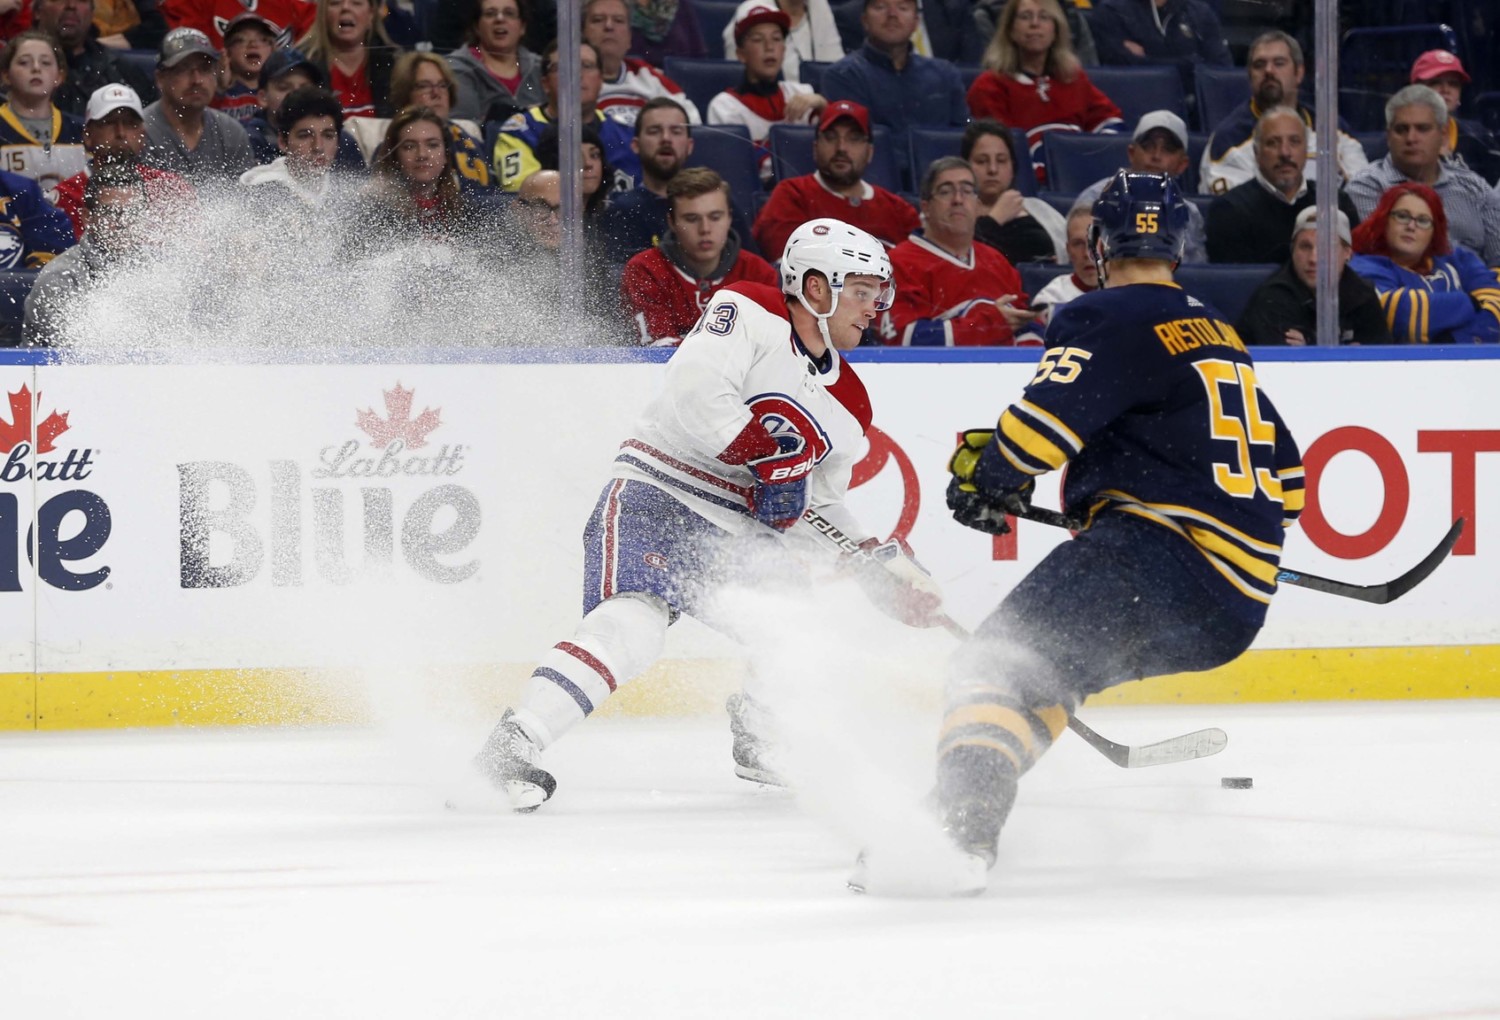 The Buffalo Sabres could be looking for a second-line center. Some option for the Montreal Canadiens if they are looking to add.